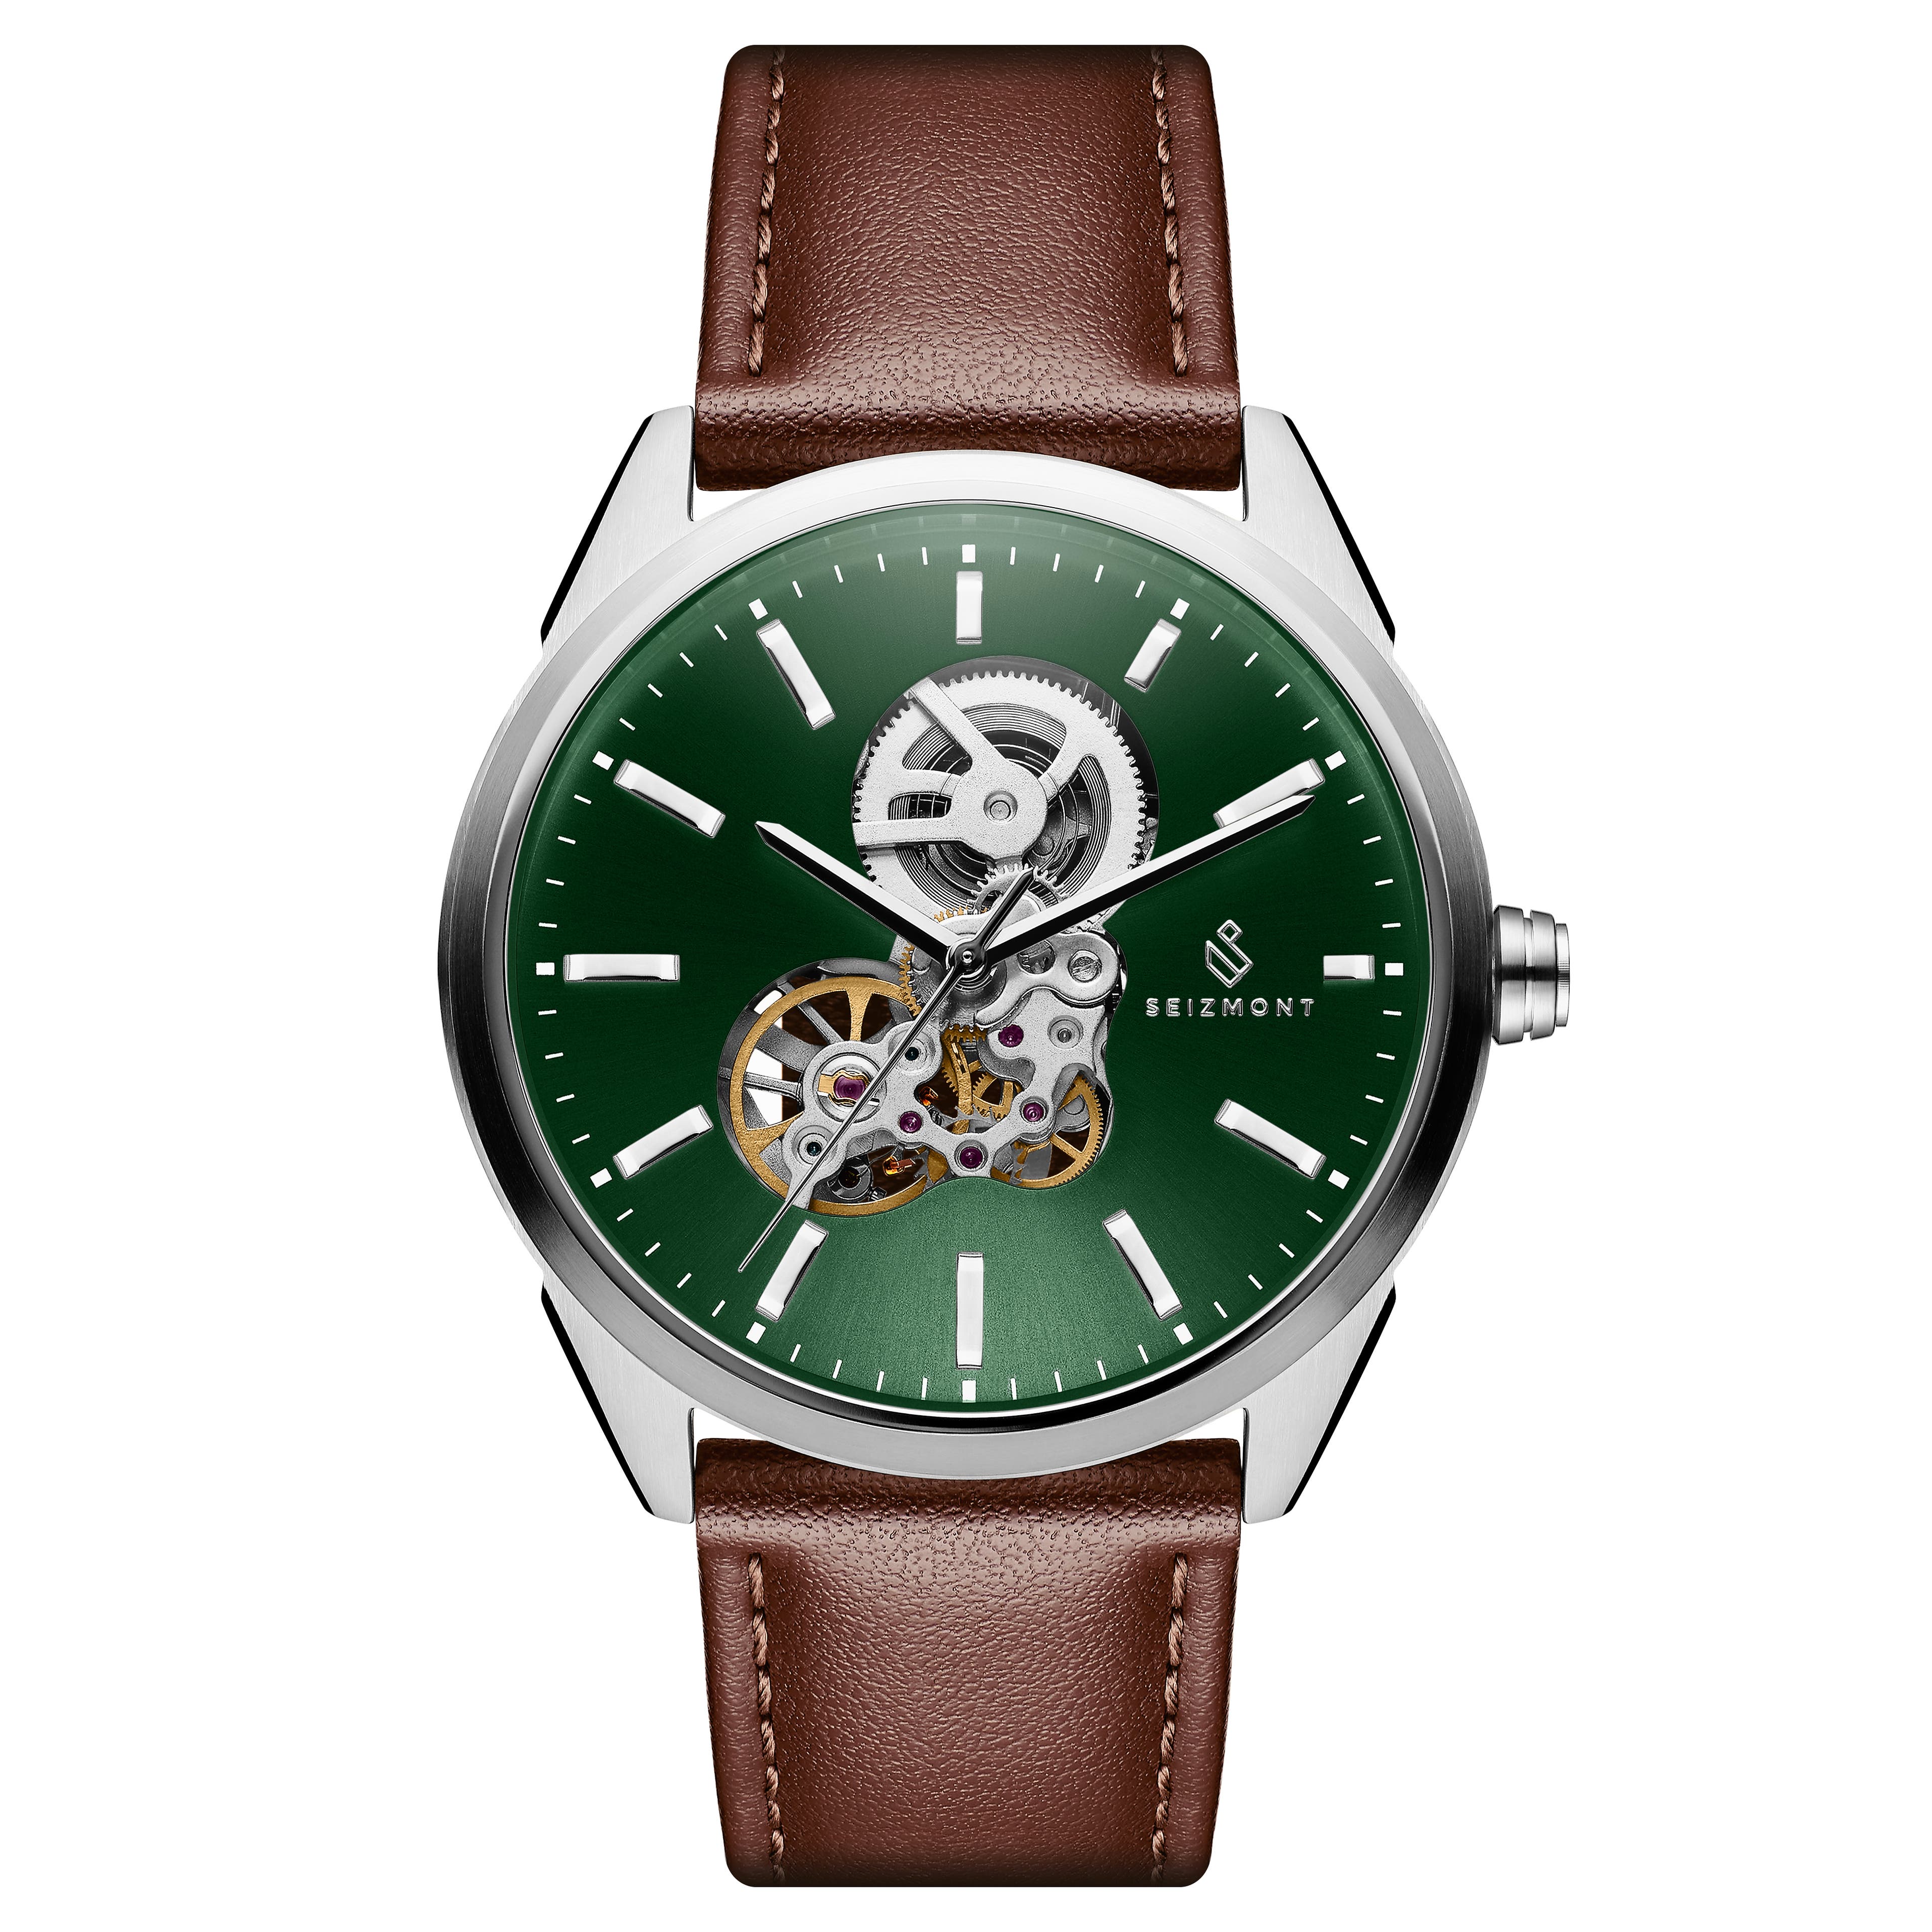 Cor | Silver-Tone Stainless Steel Skeleton Watch With Bold Green Dial